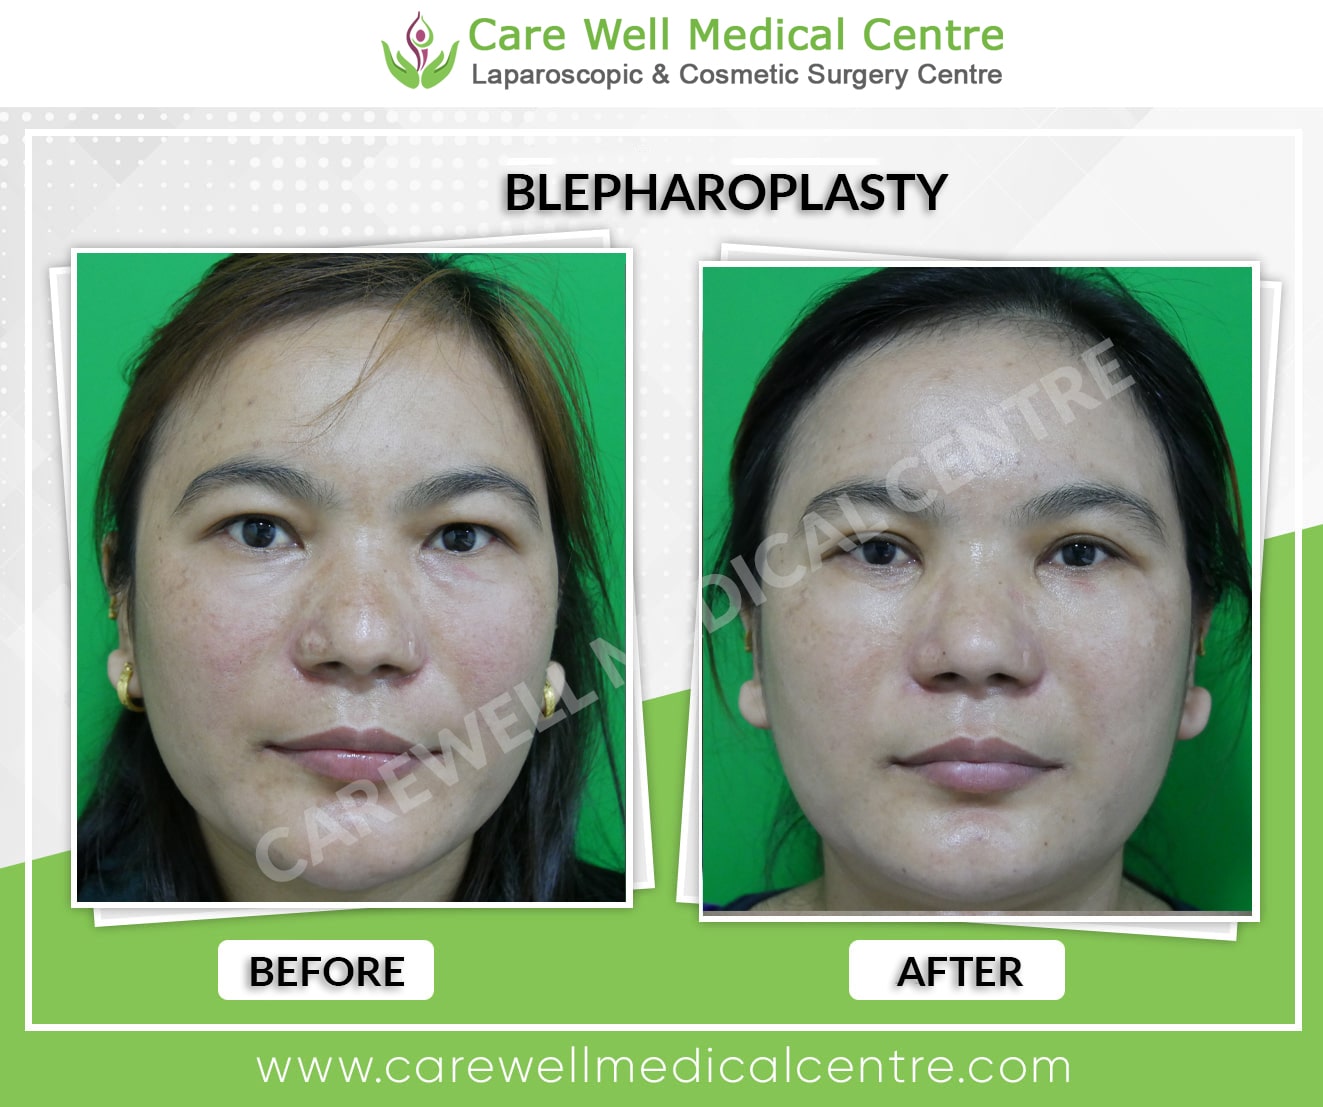 A comparison photo showing the transformation of double eyelids before and after surgery.